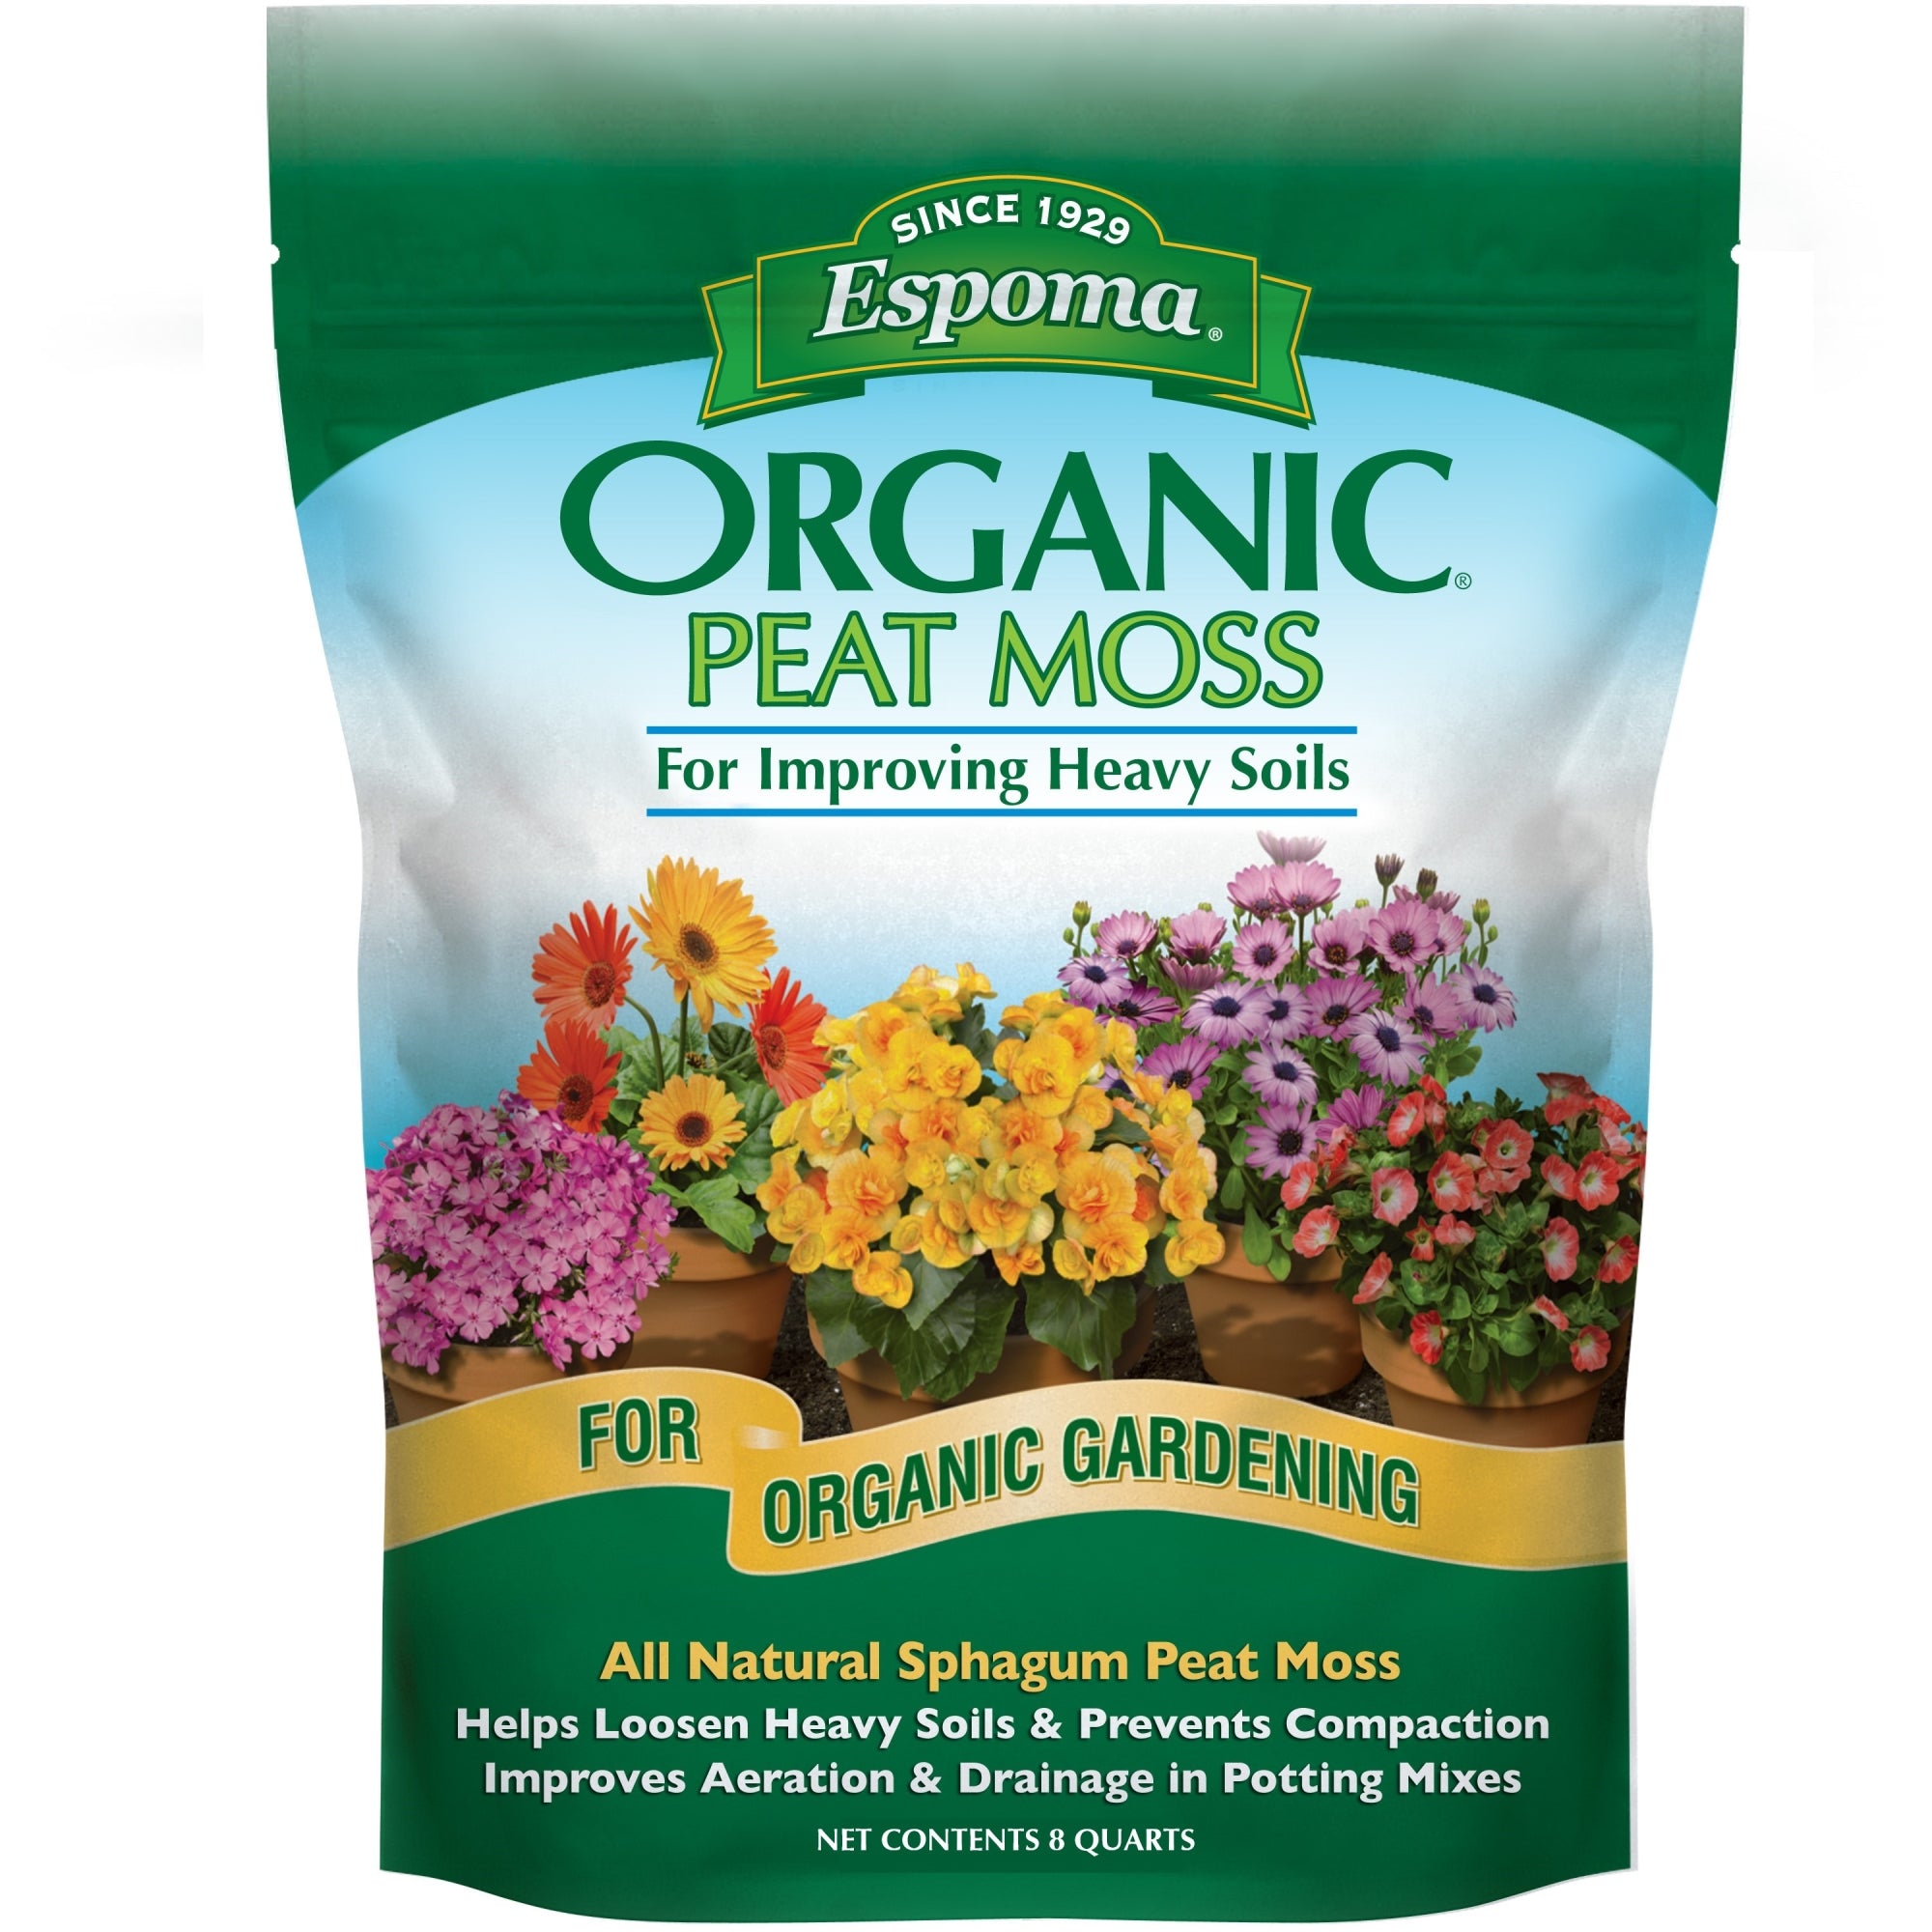 Espoma Organic Peat Moss, All-Natural Sphagnum Peat Moss to Improve Heavy Soils, Approved for Organic Gardening, 8 Qt Bag